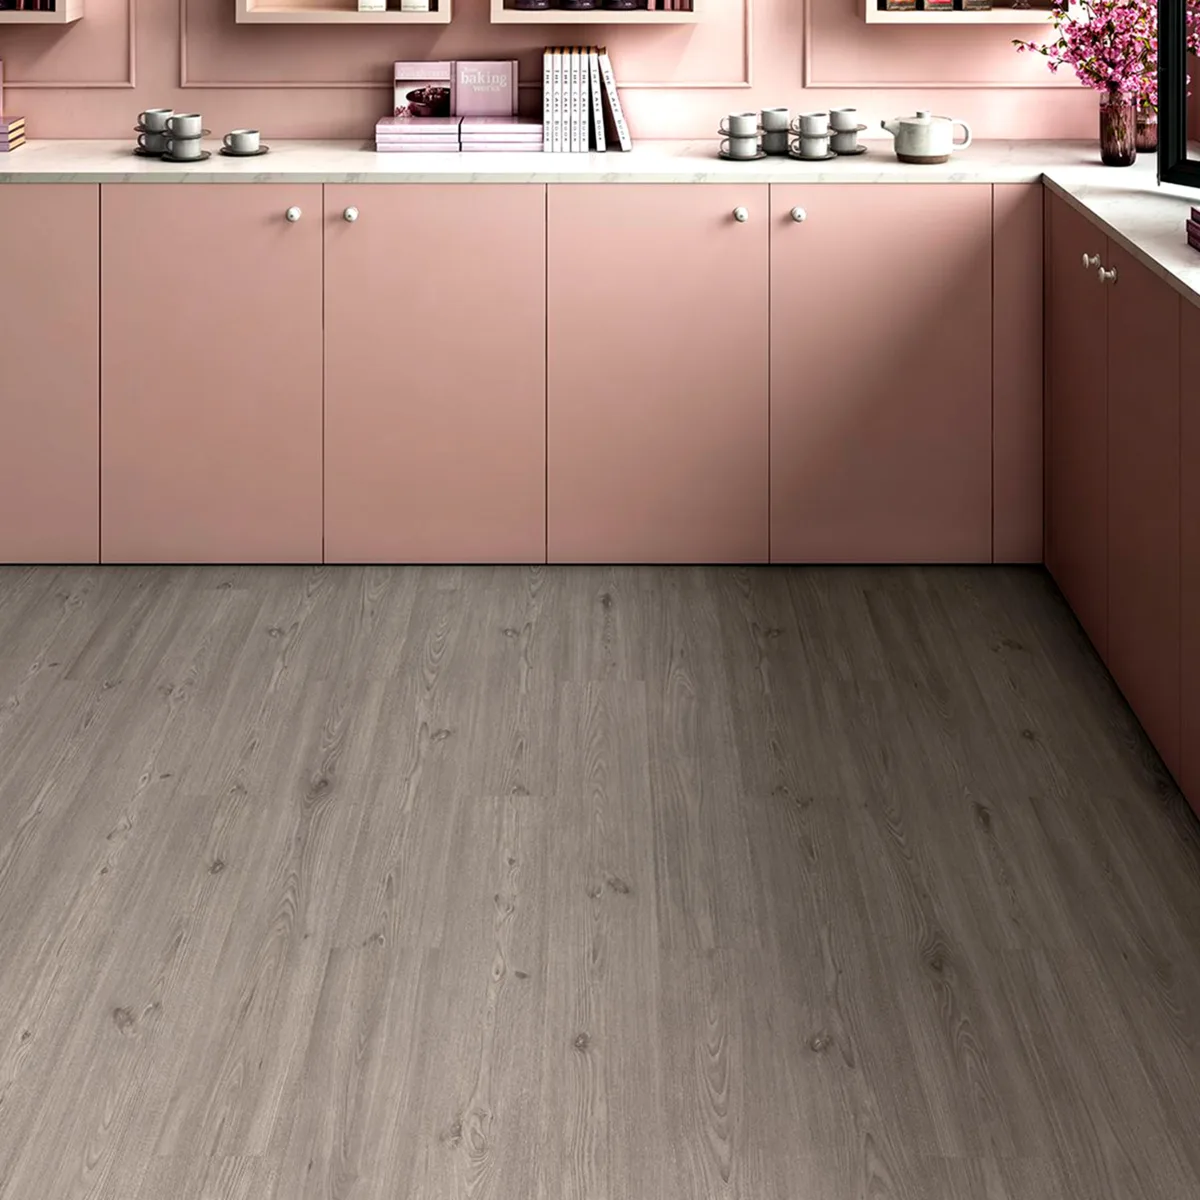 Tango Alsace rigid laminate water resistant with unparalleled durability